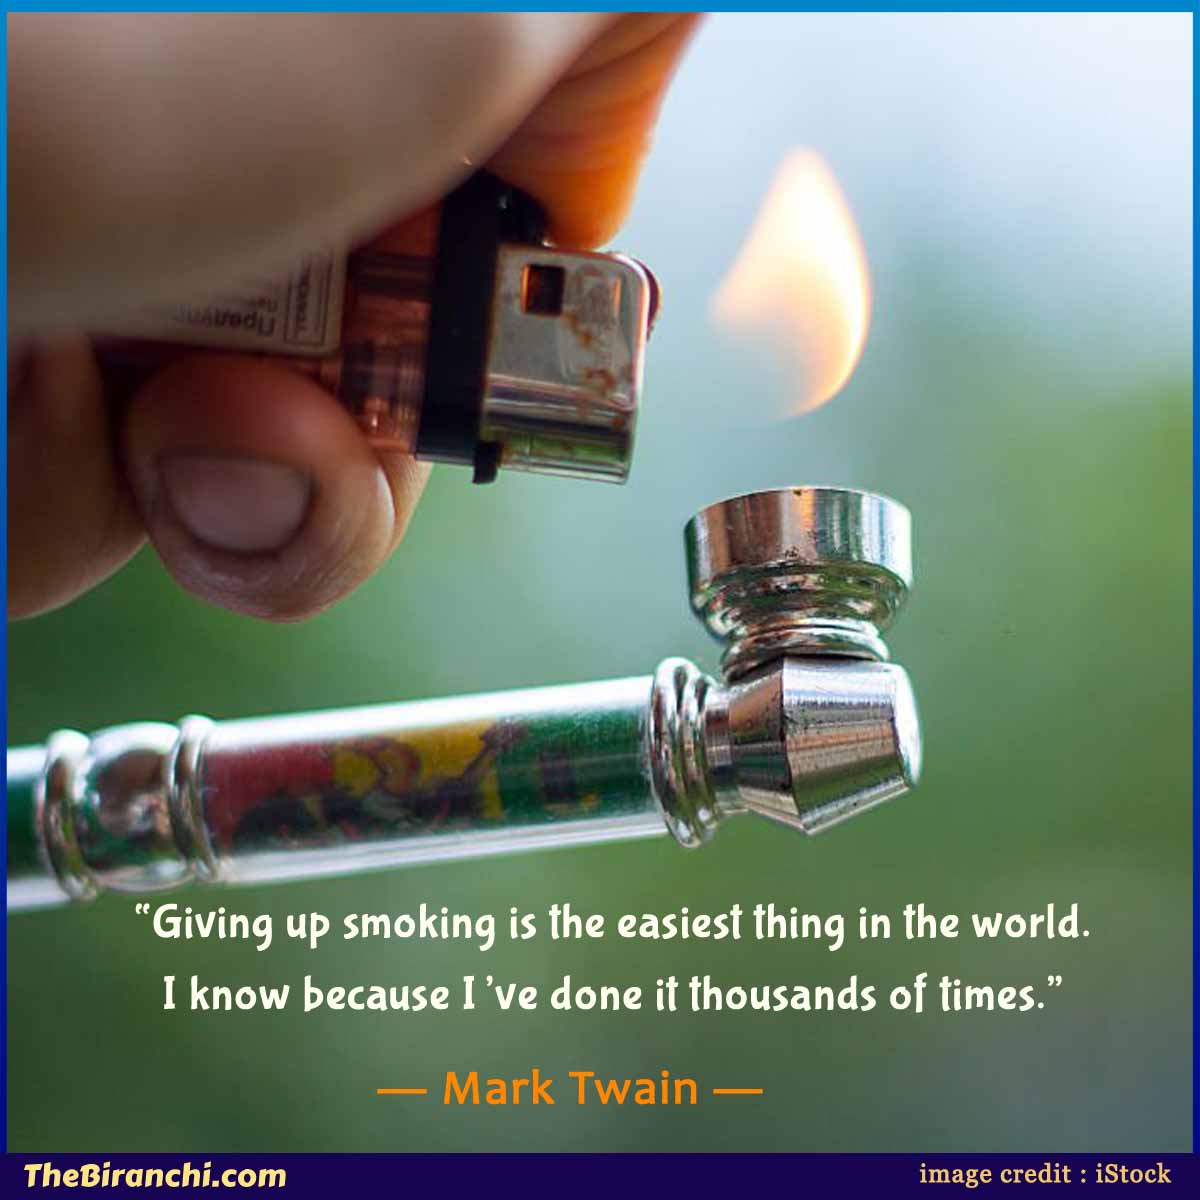 giving-up-smoking-is-the-easiest-thing-in-the-world-i-have-done-it-thousands-of-times-Mark-Twain-anti-tobacco-funny-quotes-1